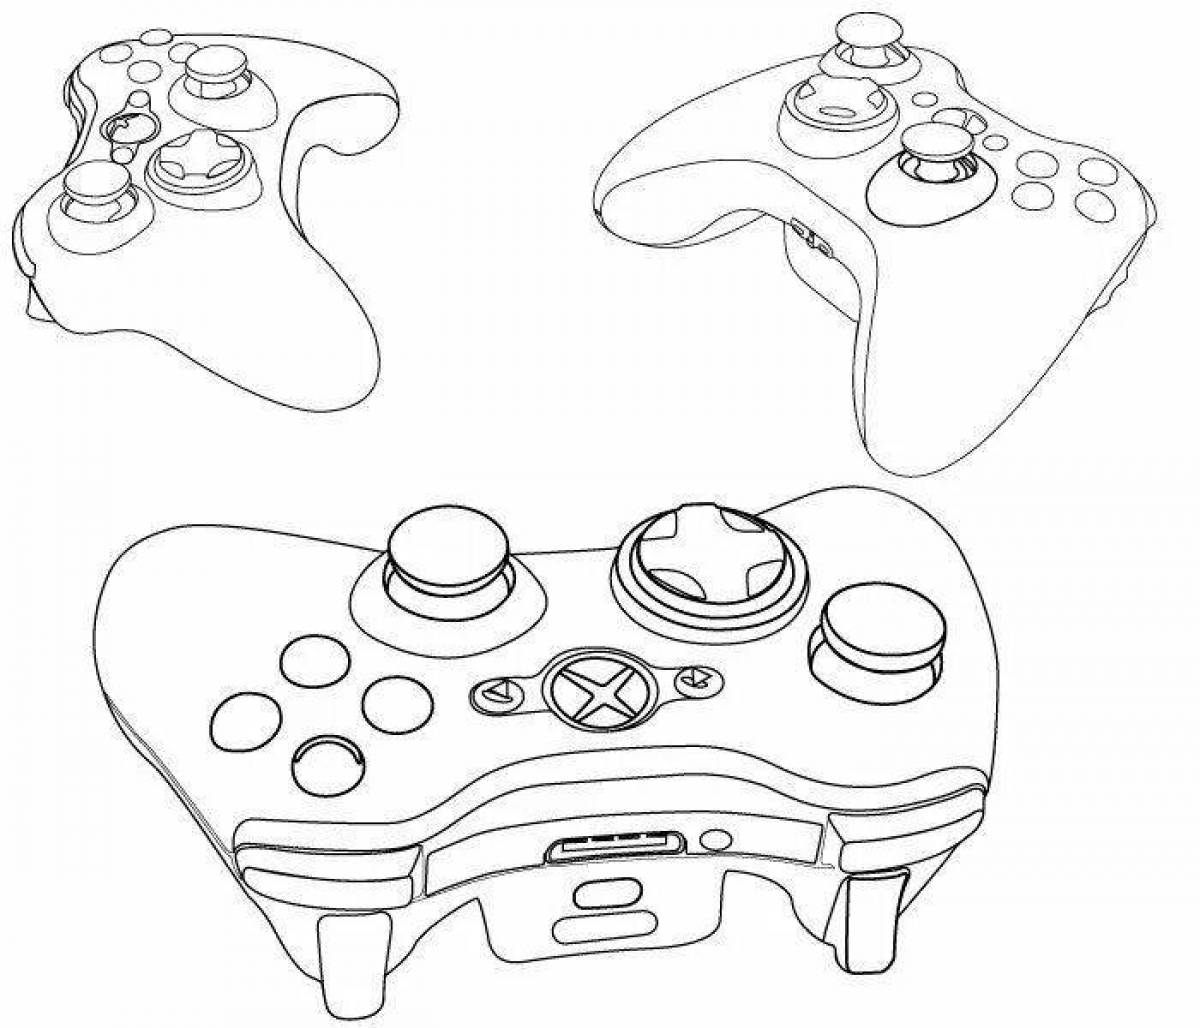 Glowing Gamepad Coloring Page